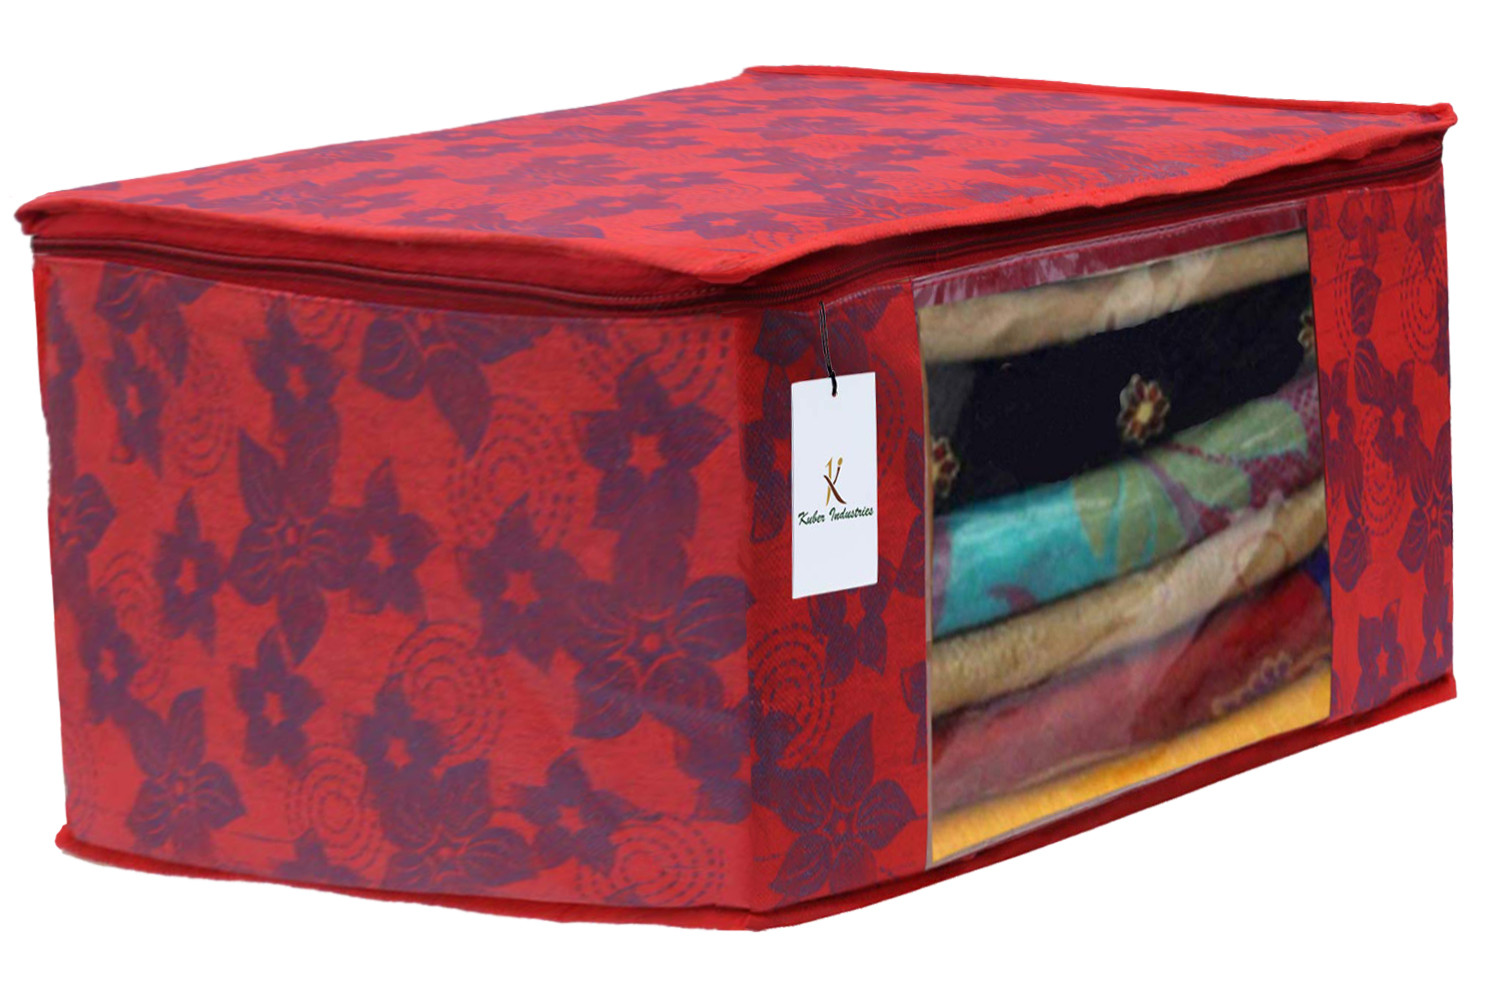 Kuber Industries Metalic Printed Non Woven Saree Cover And Underbed Storage Bag, Storage Organiser, Blanket Cover, Ivory Red & Red  -CTKTC42373